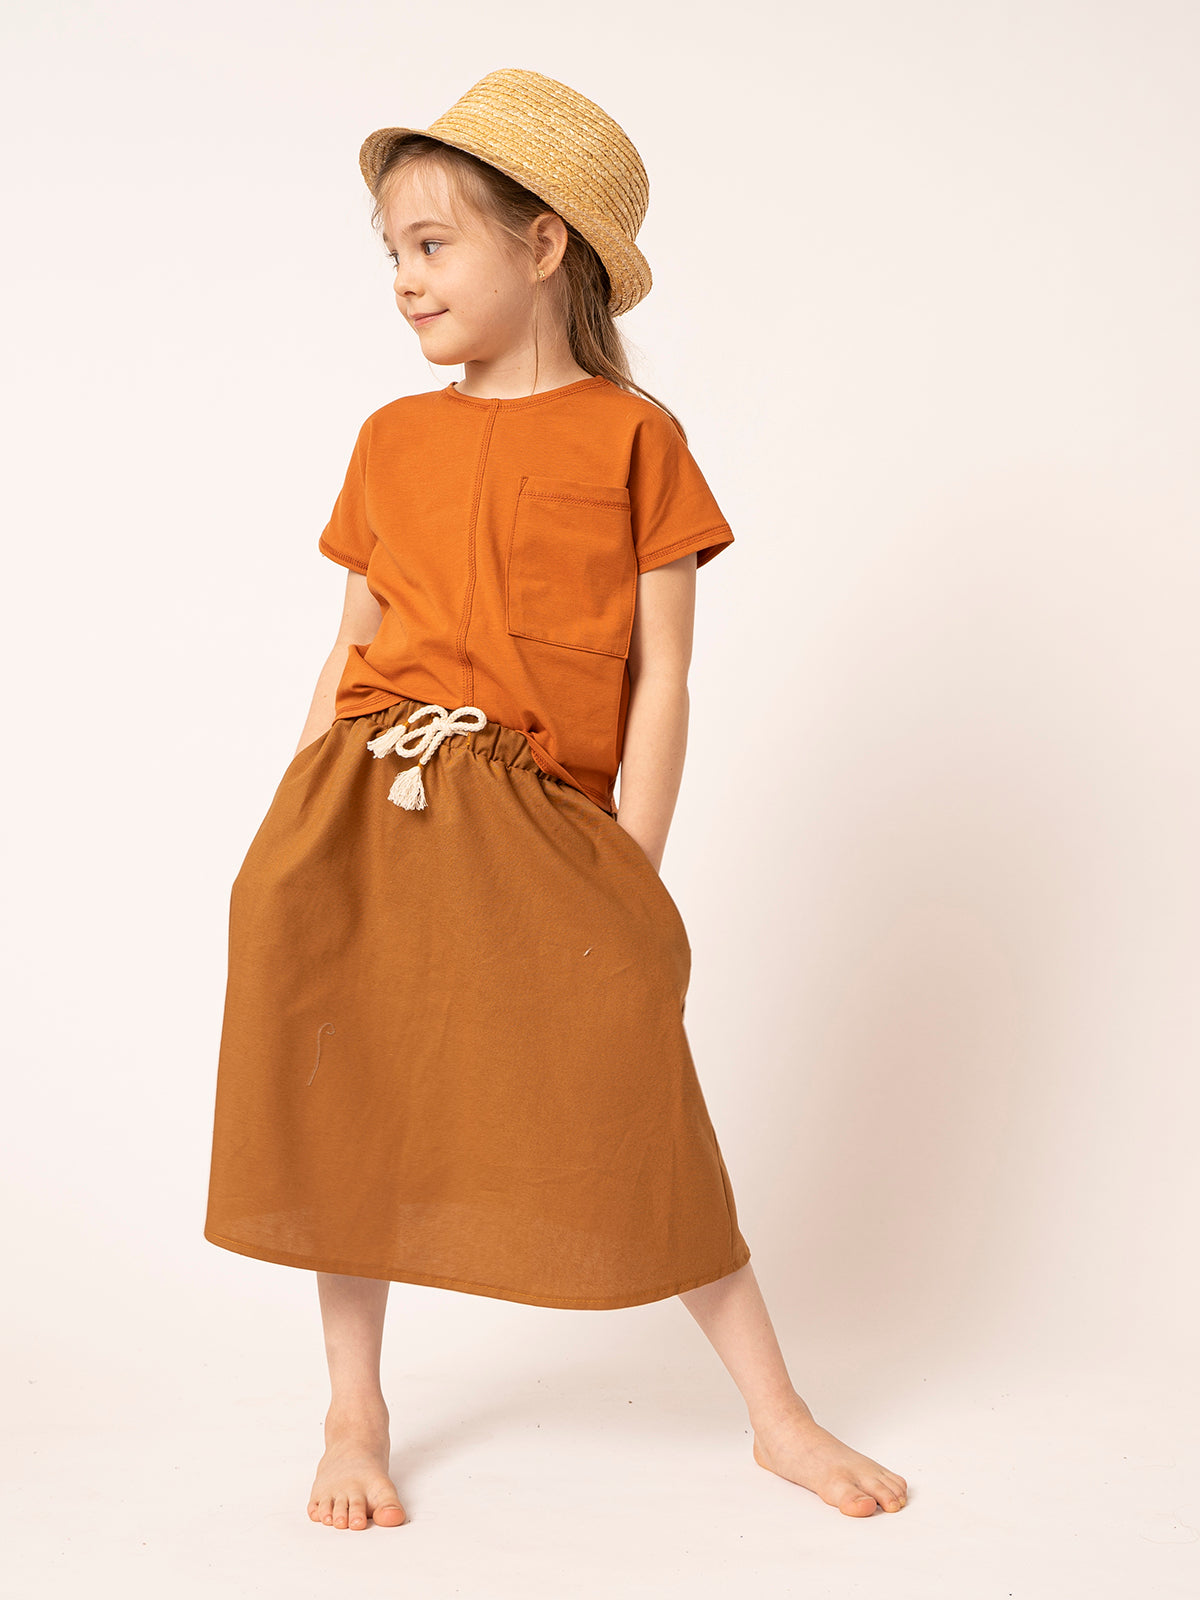 Girl's skirt in mustard-colored cotton canvas